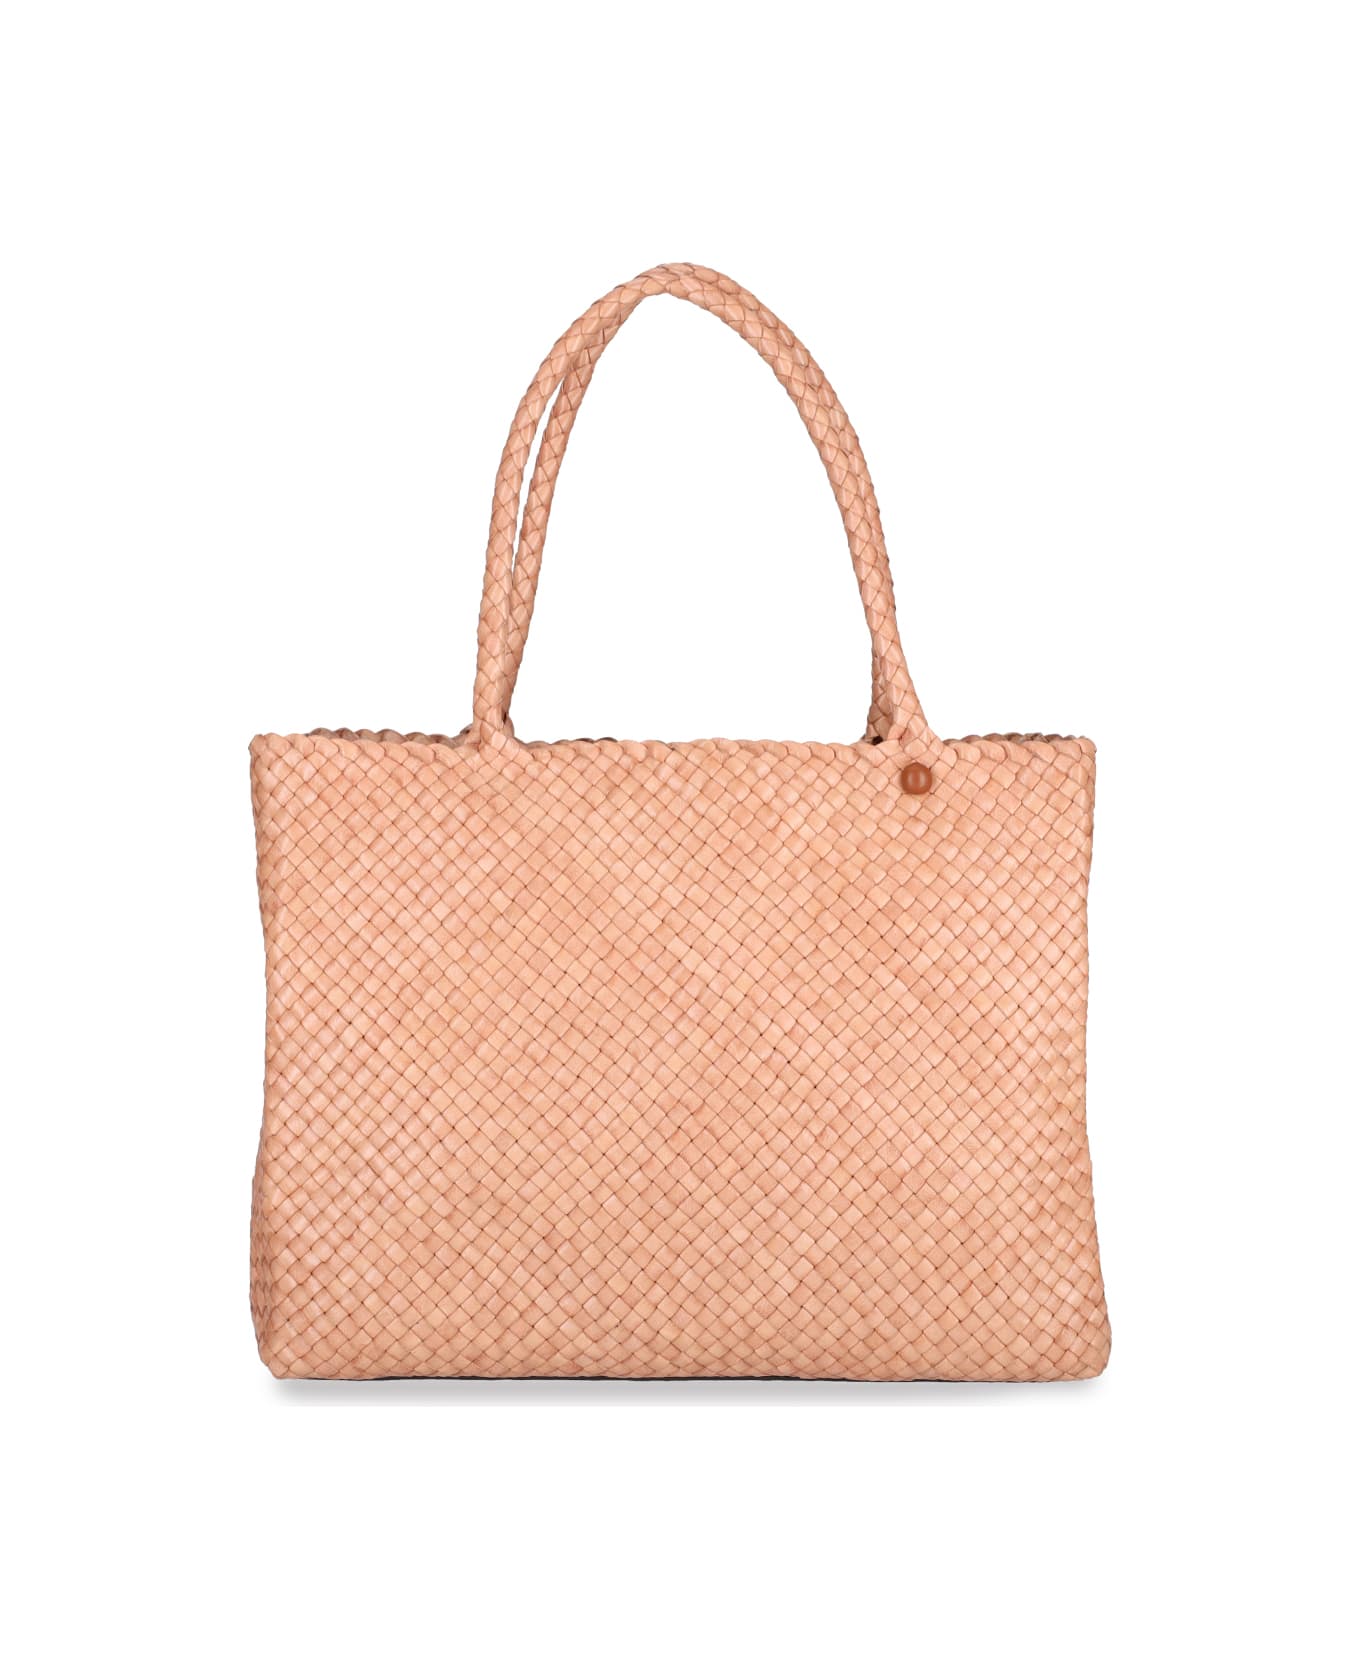 Tory Burch 'mcgraw Dragon Woven' Tote Bag - Pink トートバッグ